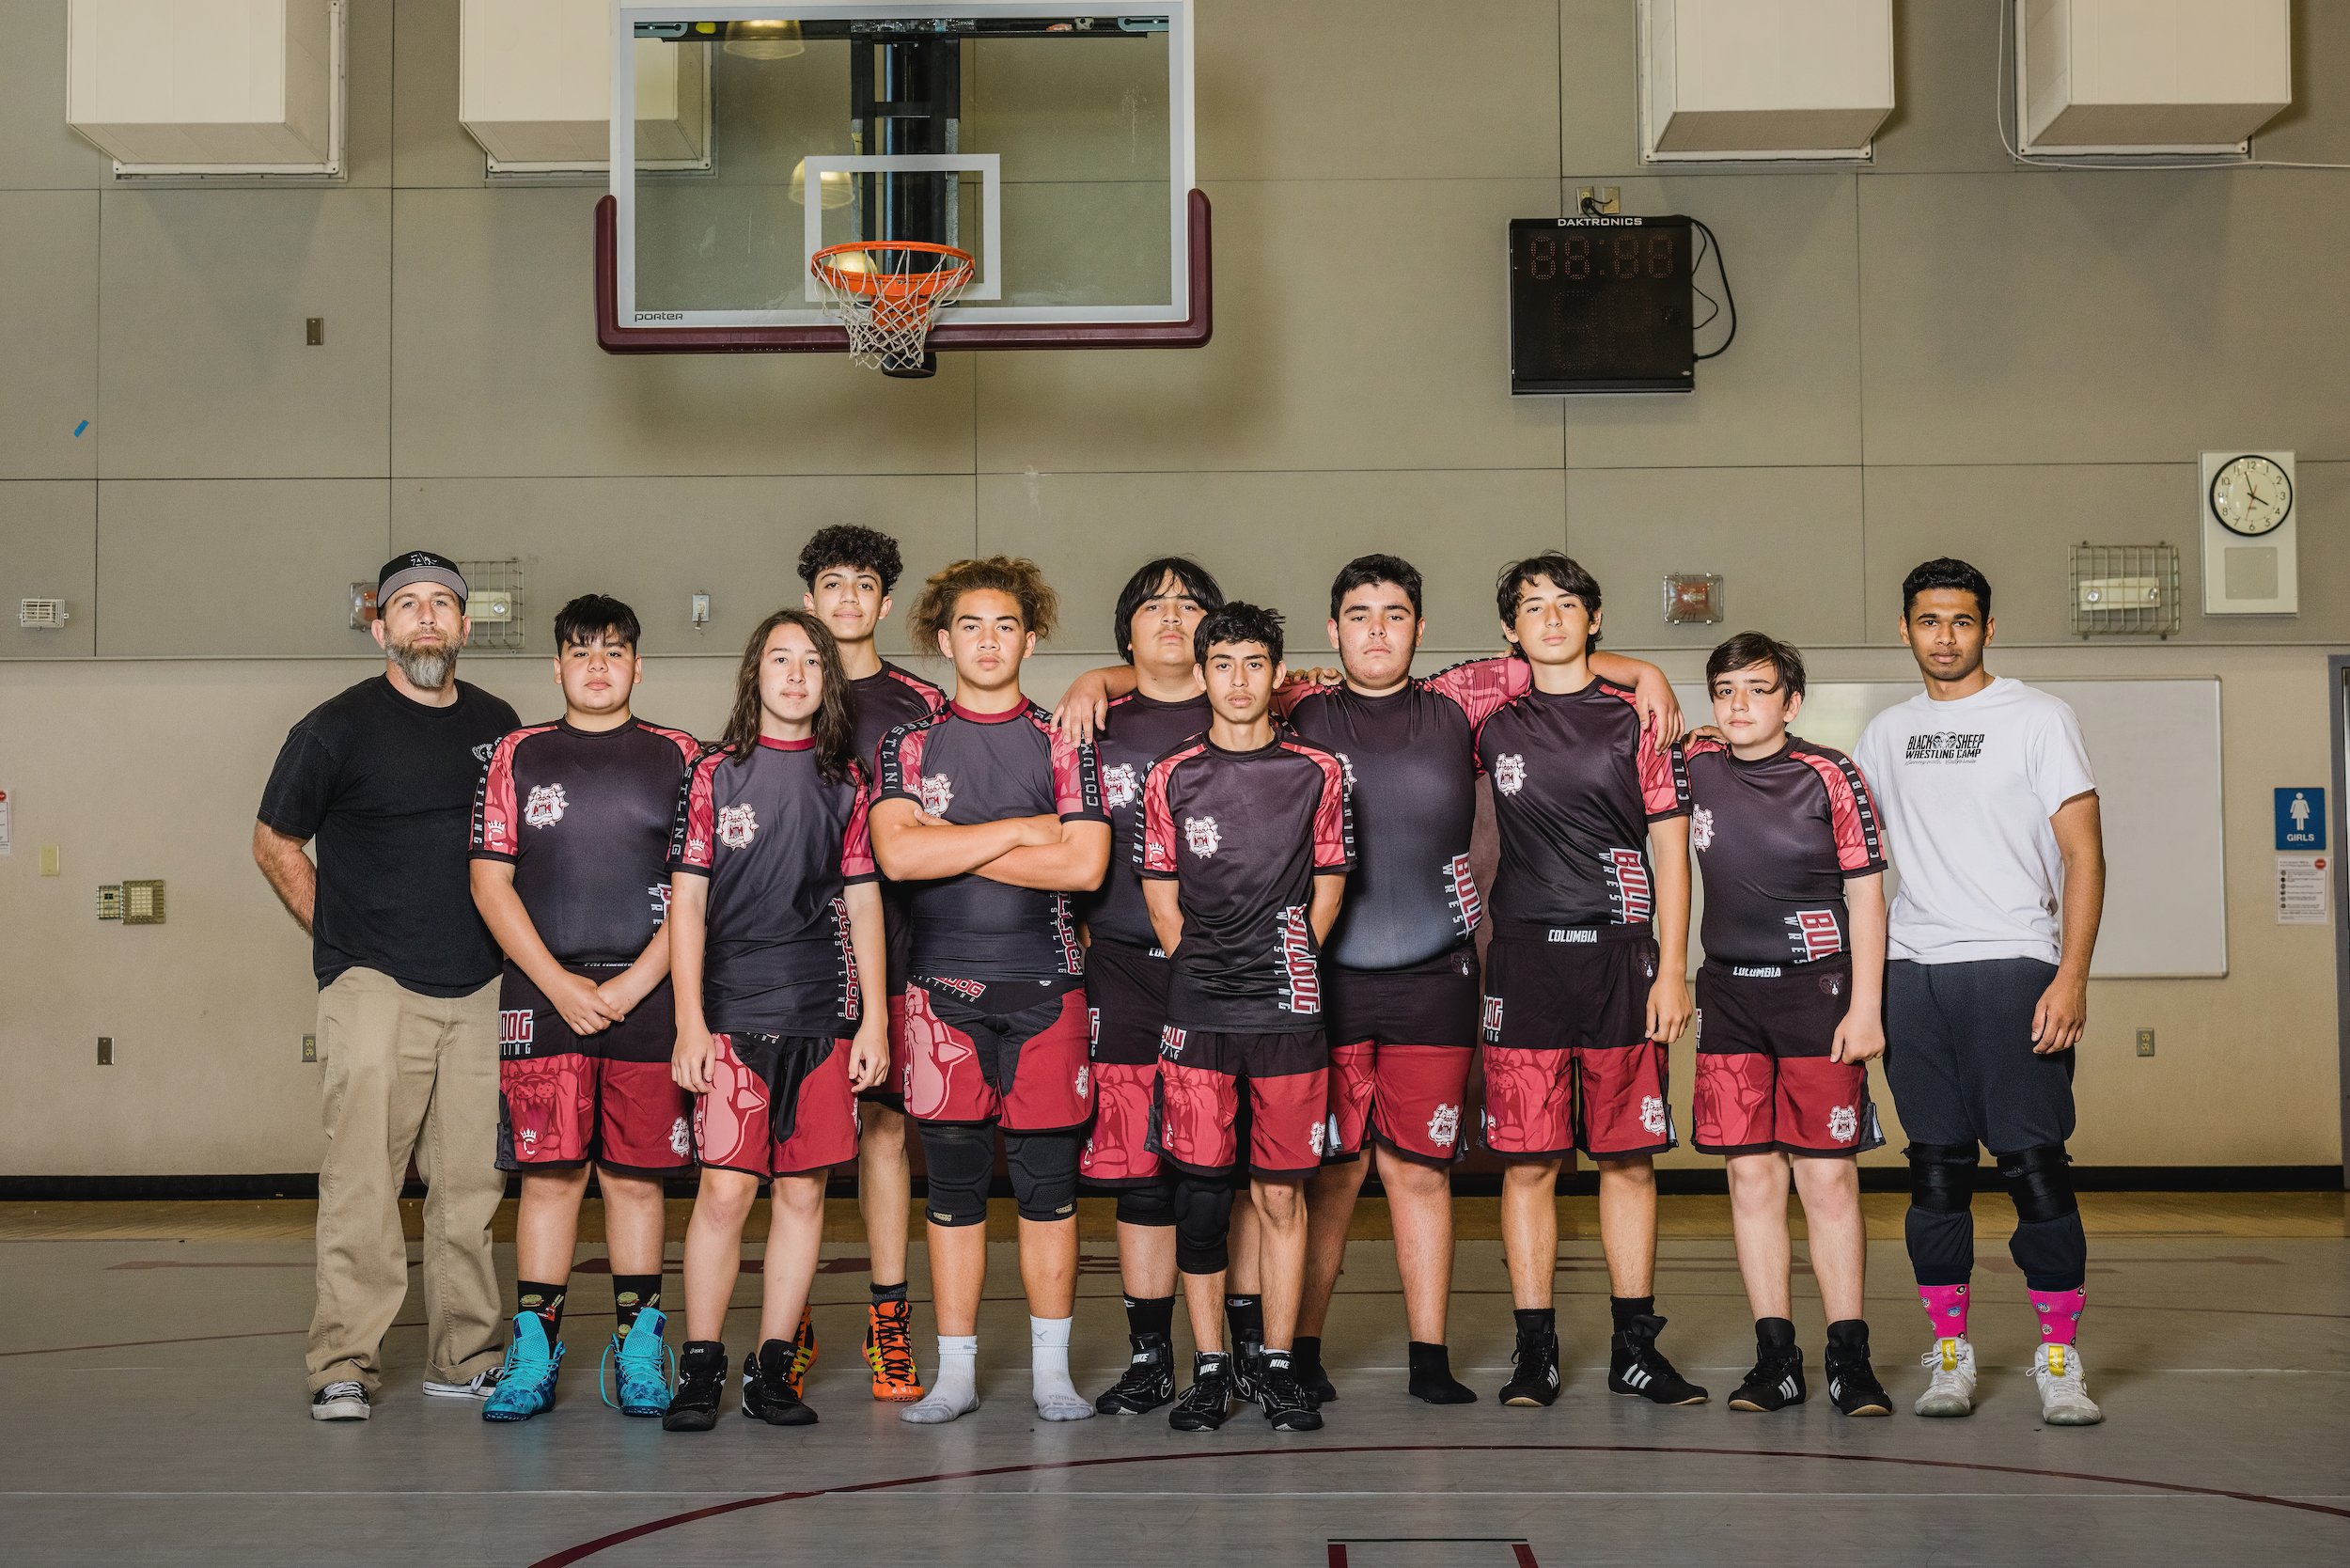 2021-2022 CMS 8th Grade Boys Wrestlers with the Coaching Staff